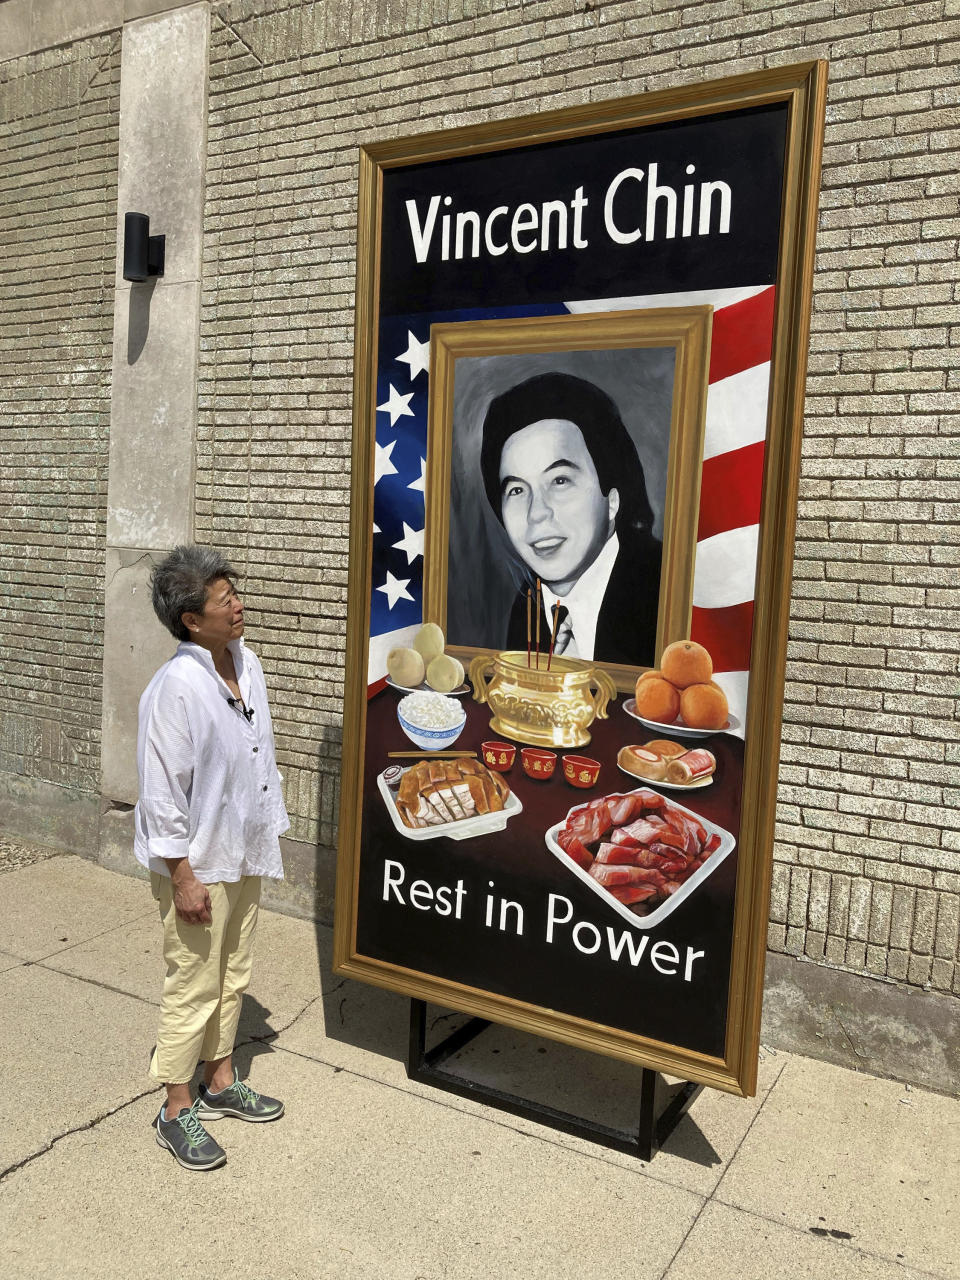 Activist and author Helen Zia poses Thursday, June 15, 2022, next to a painting of Vincent Chin in Detroit. The city is partnering with The Vincent Chin 40th Remembrance & Rededication Coalition to honor civil rights efforts that began with Chin's 1982 slaying. Chin, a Chinese American, was beaten to death in Detroit by two white men who never served jail time. The commemoration comes as hate crimes against Asian Americans are on the rise in the U.S. (AP Photo/Corey Williams)